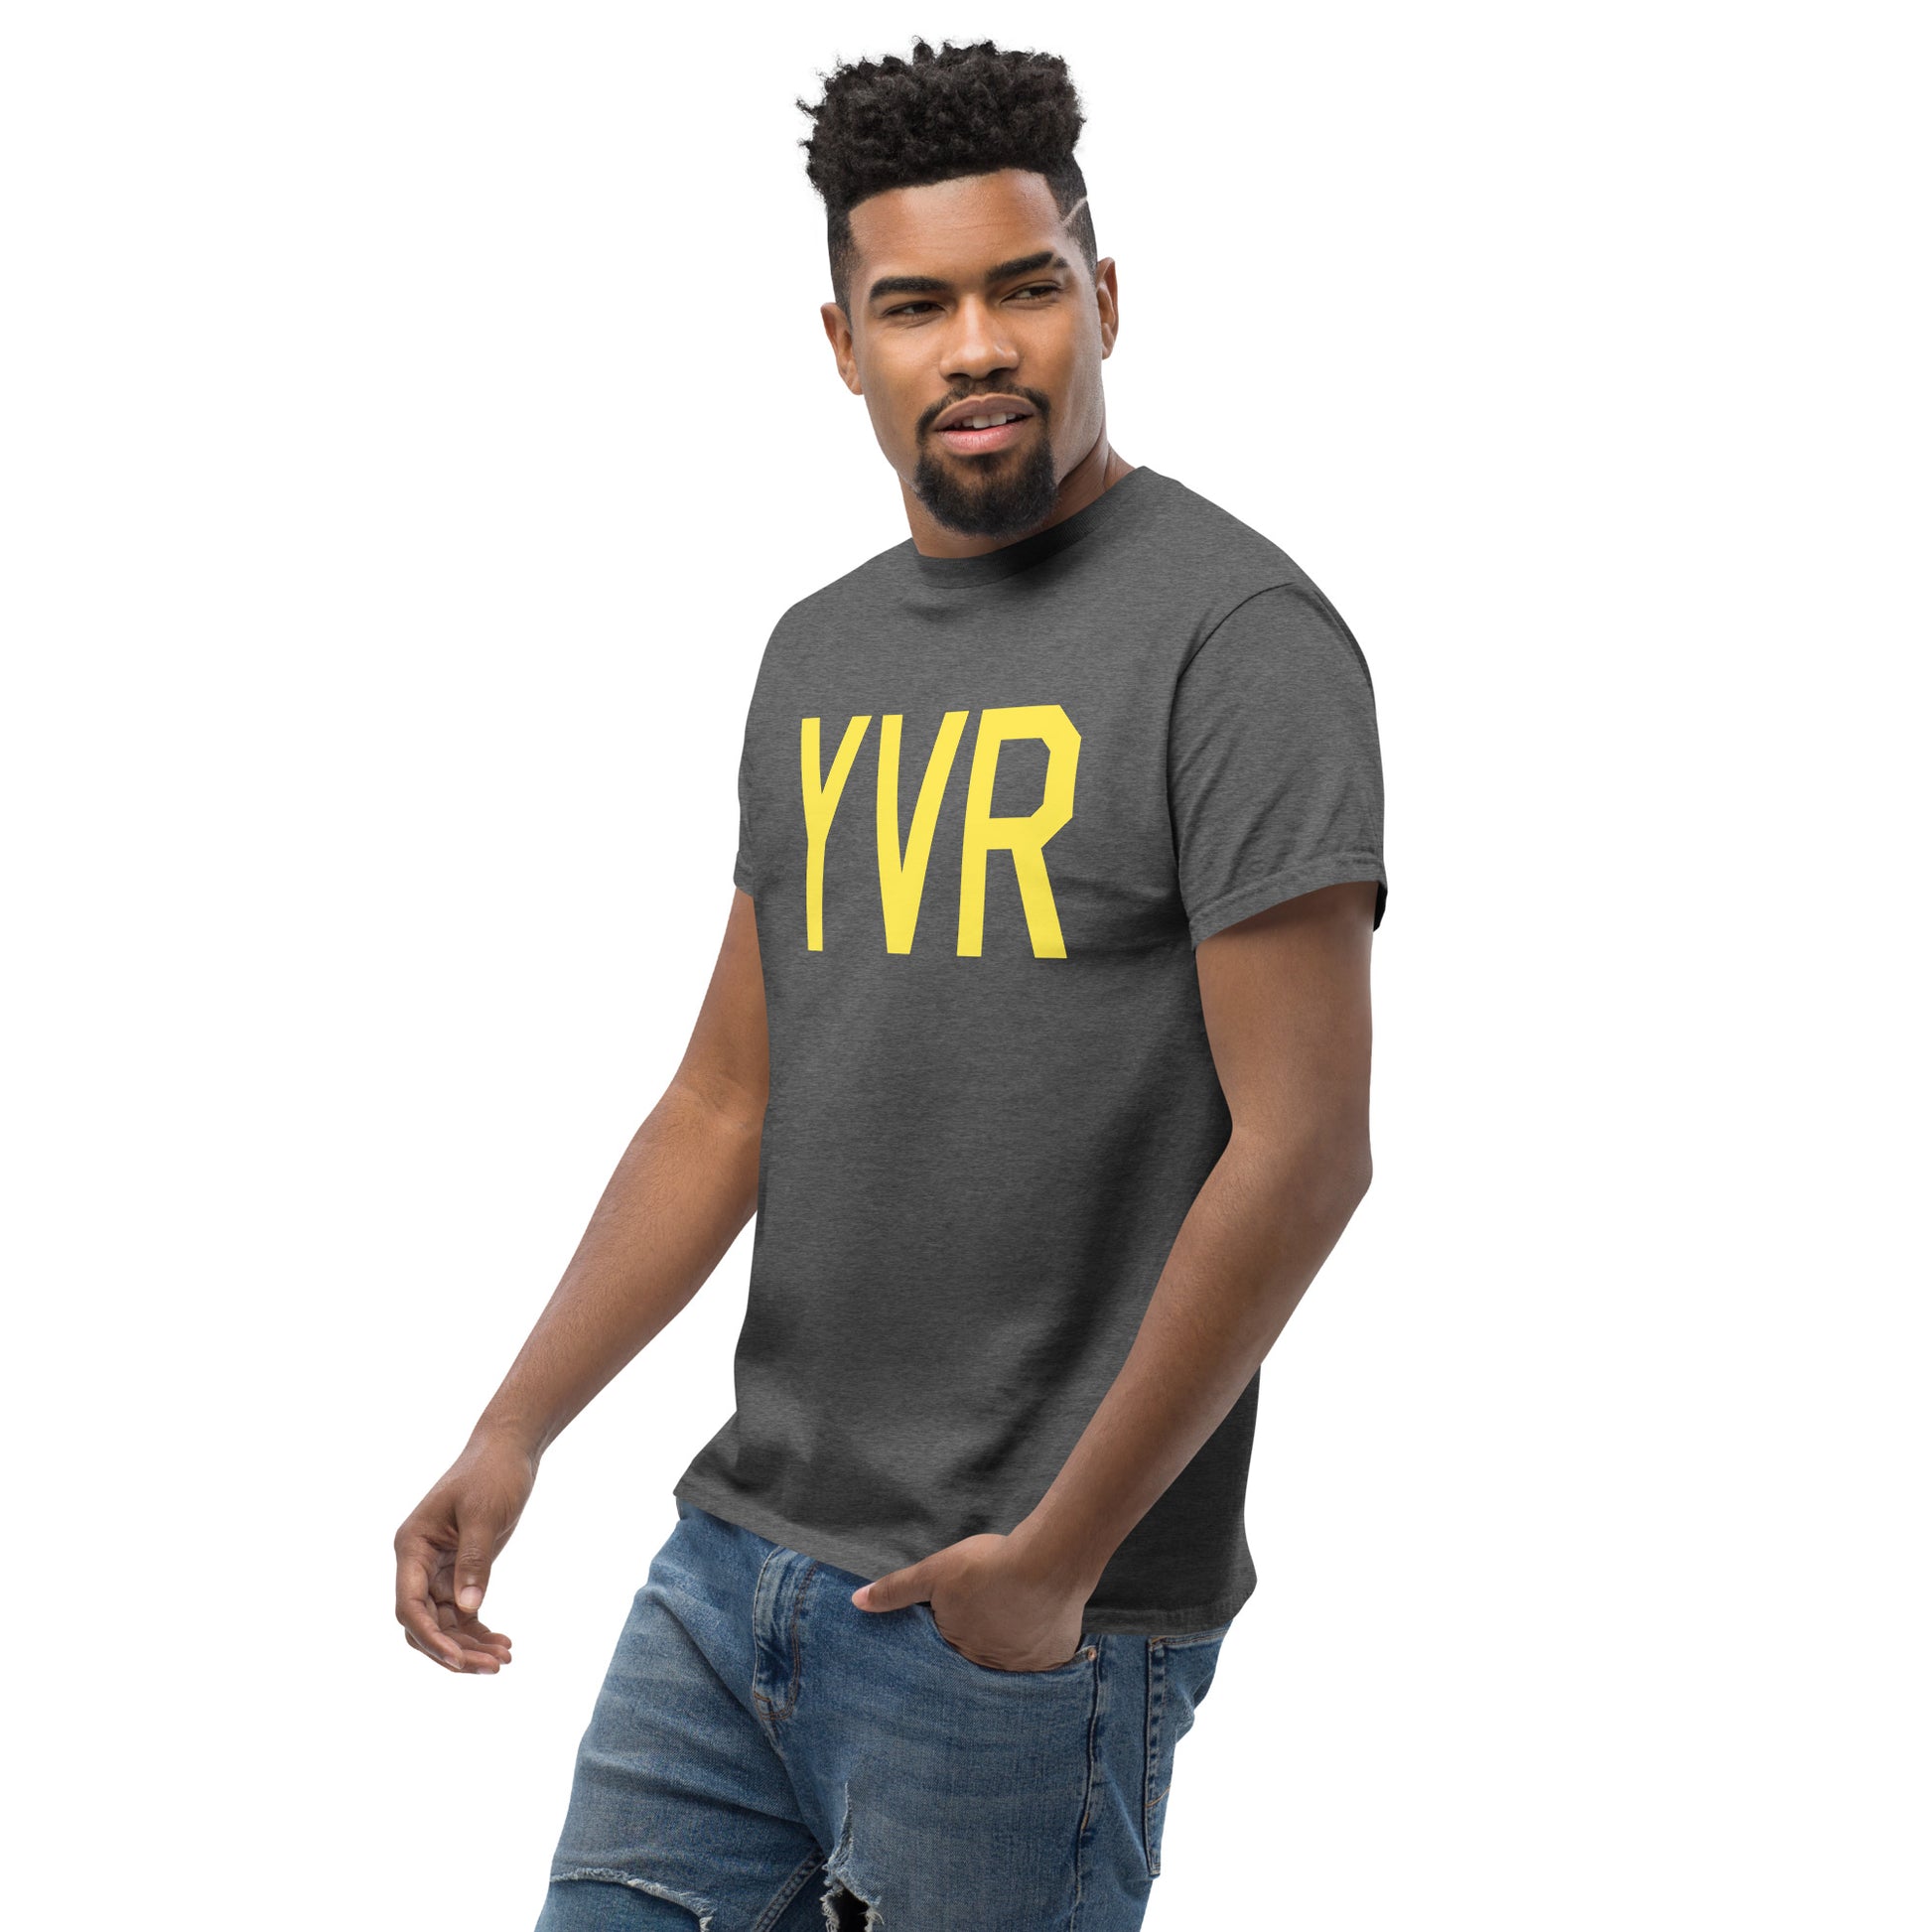 Aviation-Theme Men's T-Shirt - Yellow Graphic • YVR Vancouver • YHM Designs - Image 07